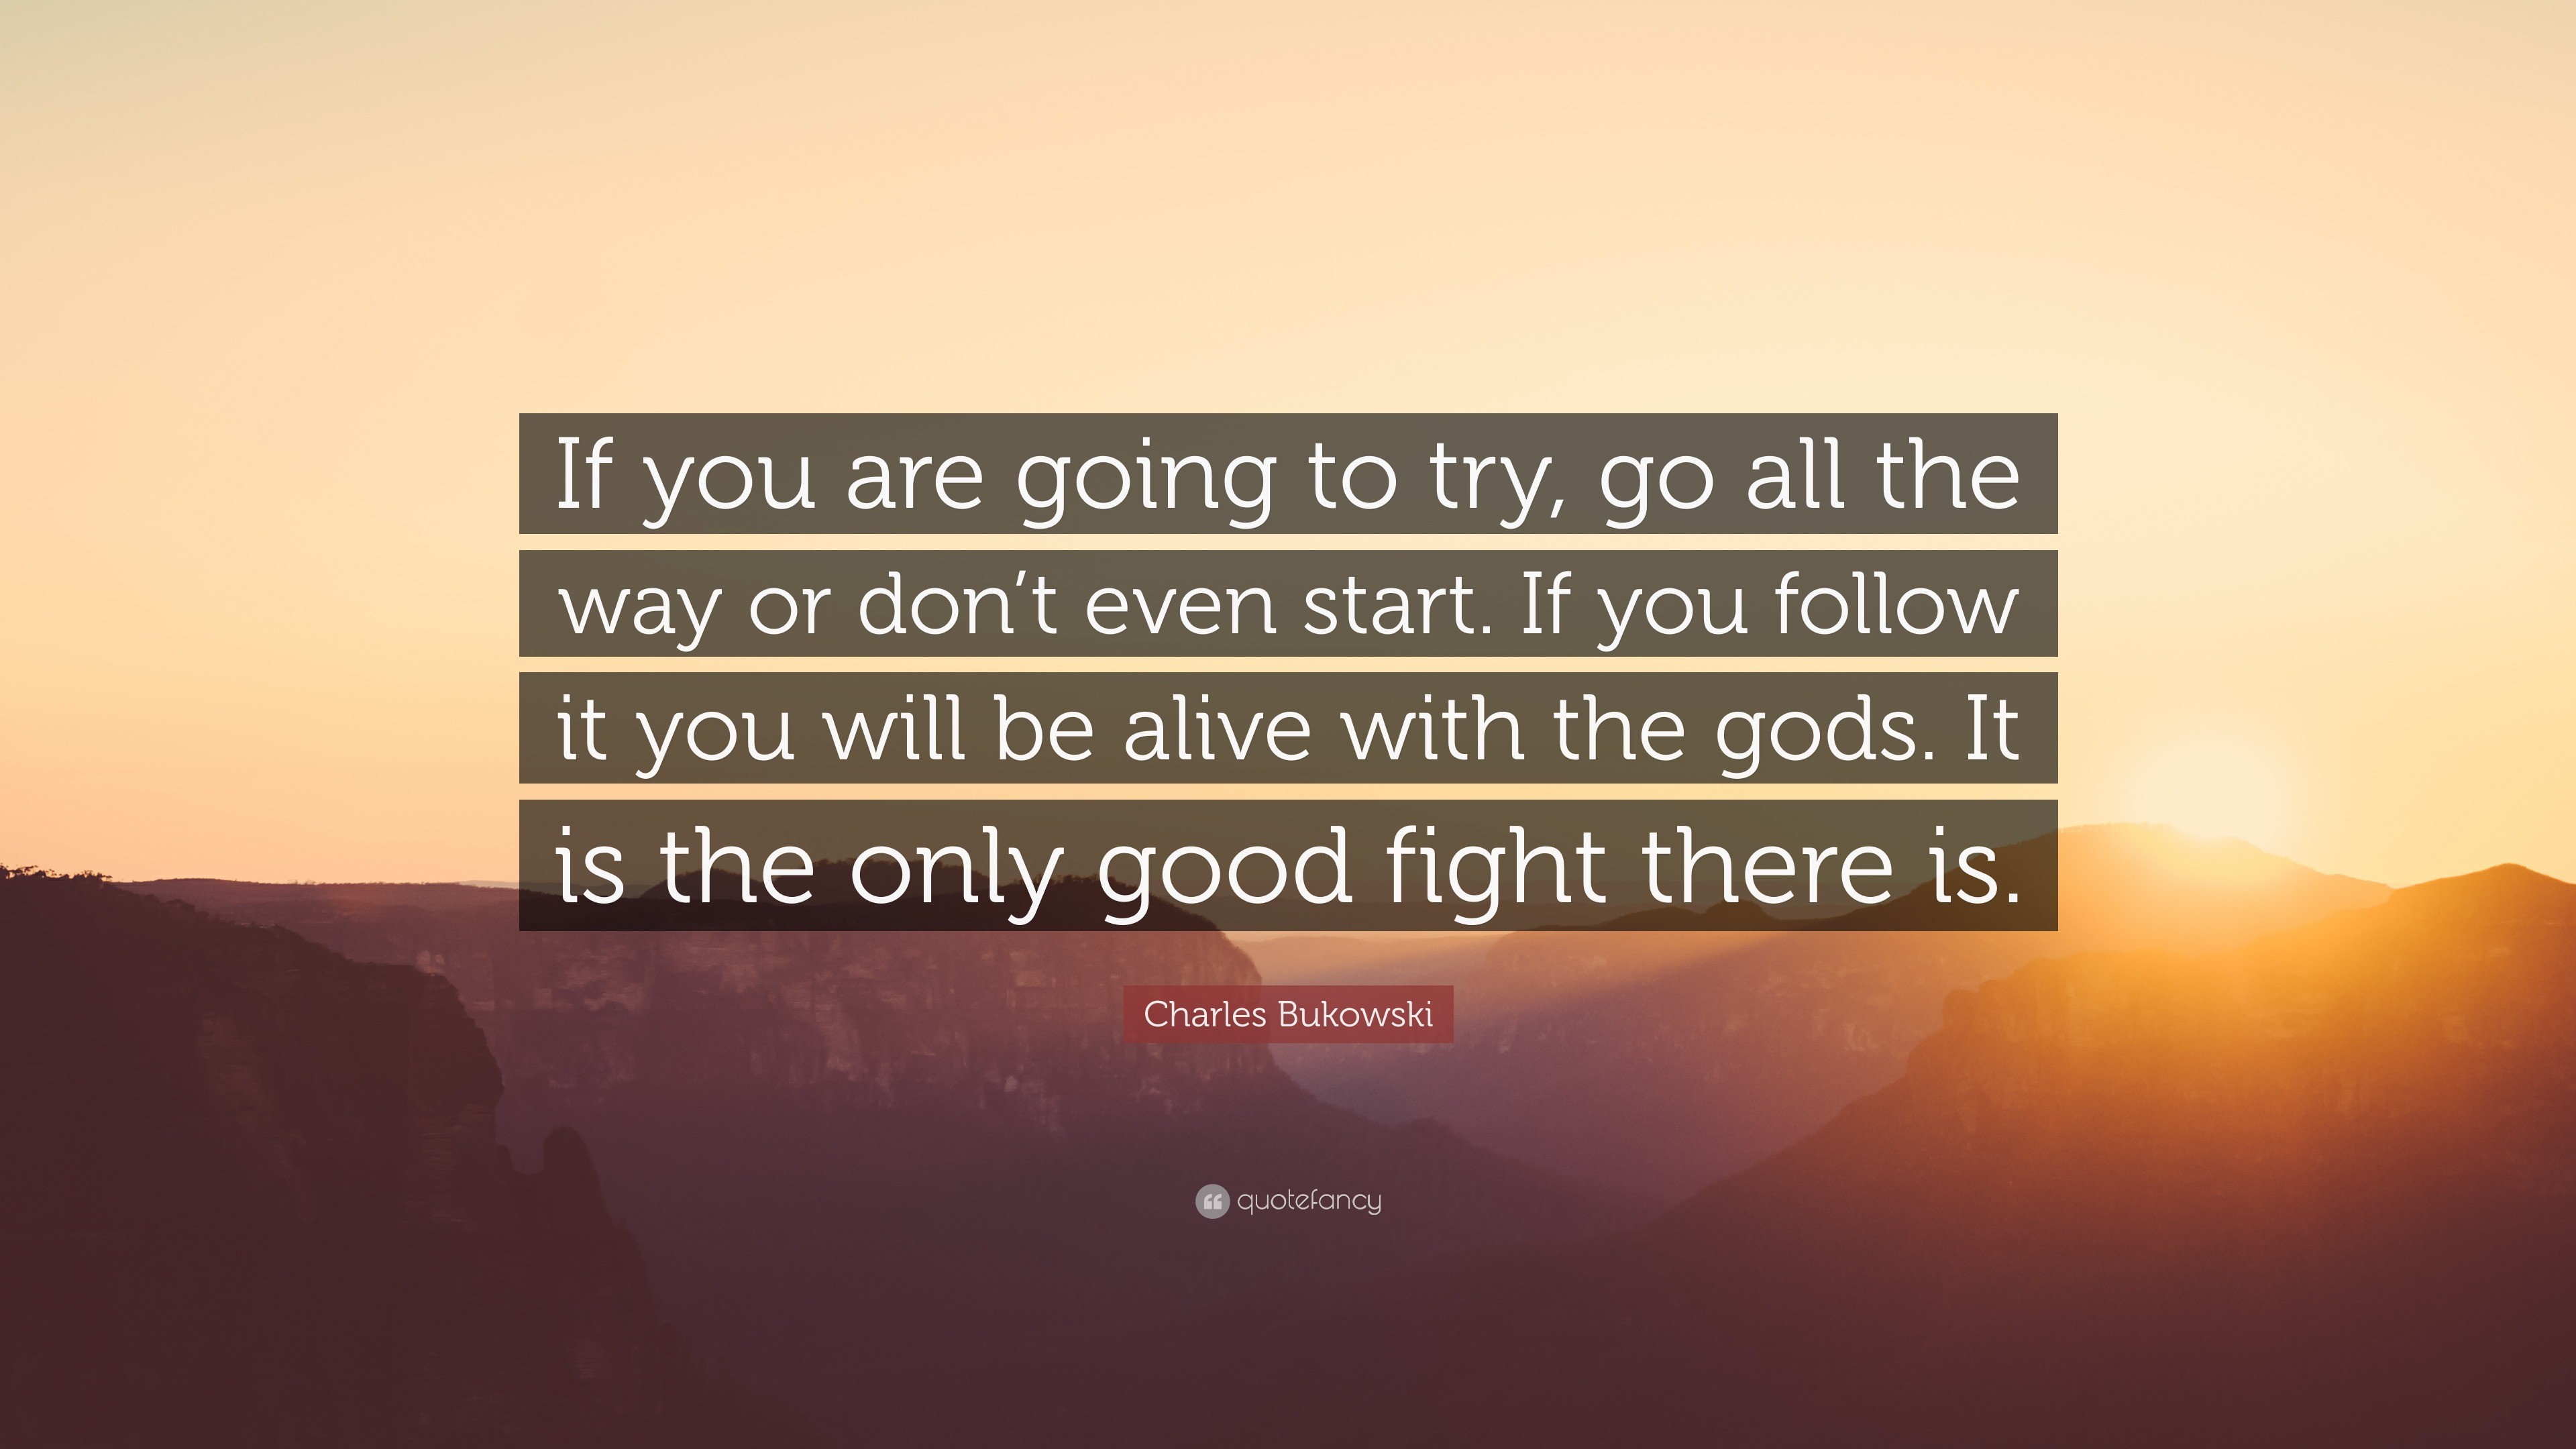 2043796-charles-bukowski-quote-if-you-are-going-to-try-go-all-the-way-or.jpeg